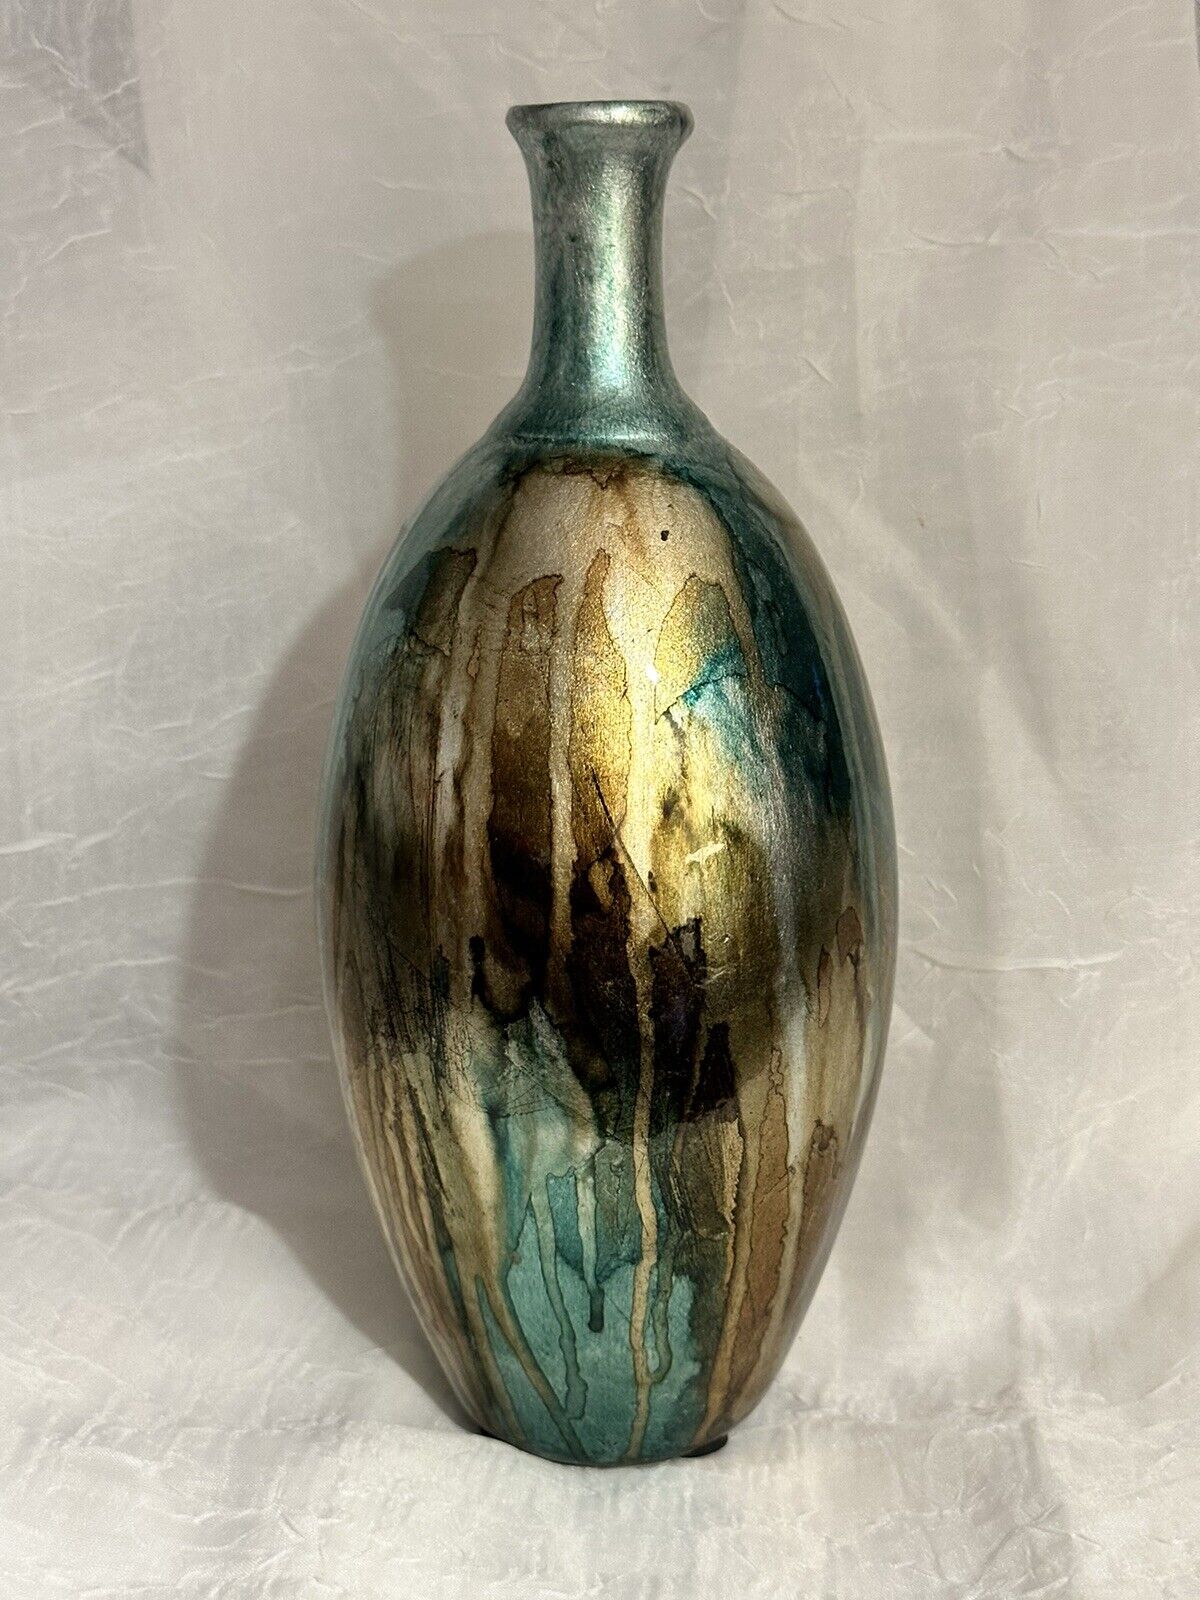 GORGEOUS Vintage Metallic Teal And Gold 12” Vase Made In China